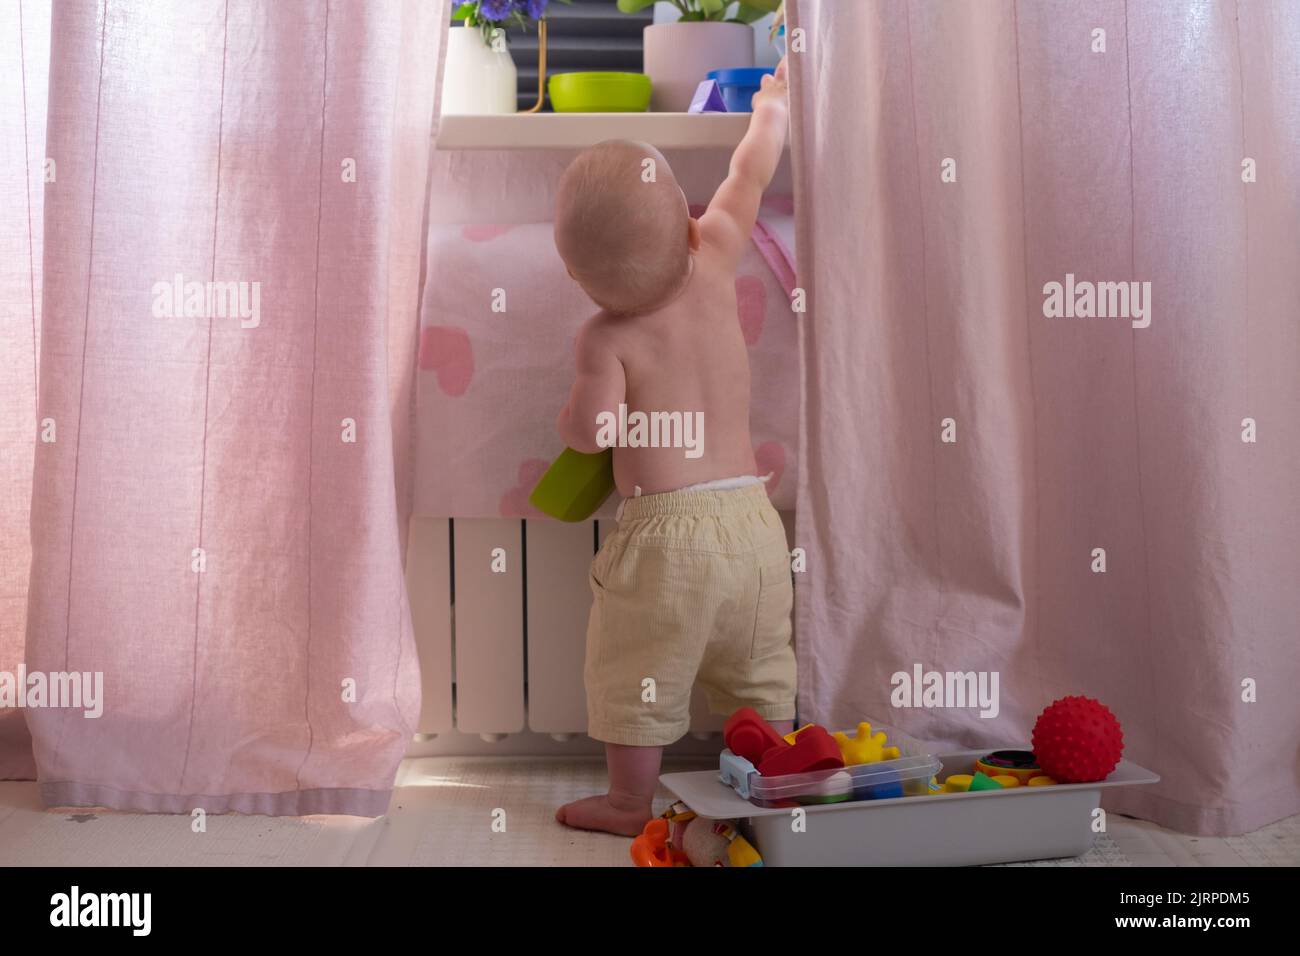 Caucasian baby playing with toys scattering them aroung. Messy room. Top view Stock Photo